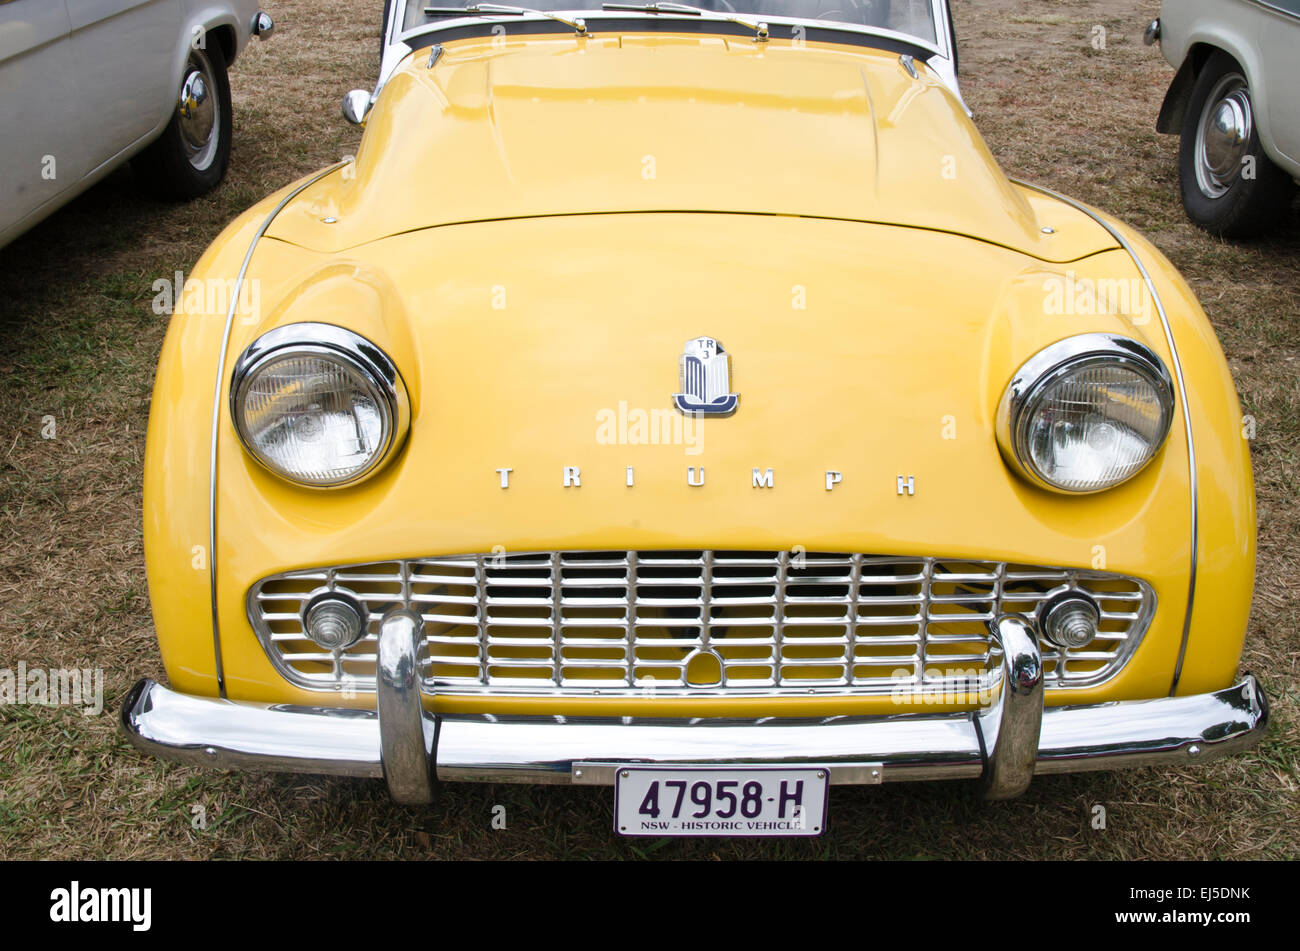 A TR3A on display at a rural show in Bendemeer Australia March 2015 Stock Photo